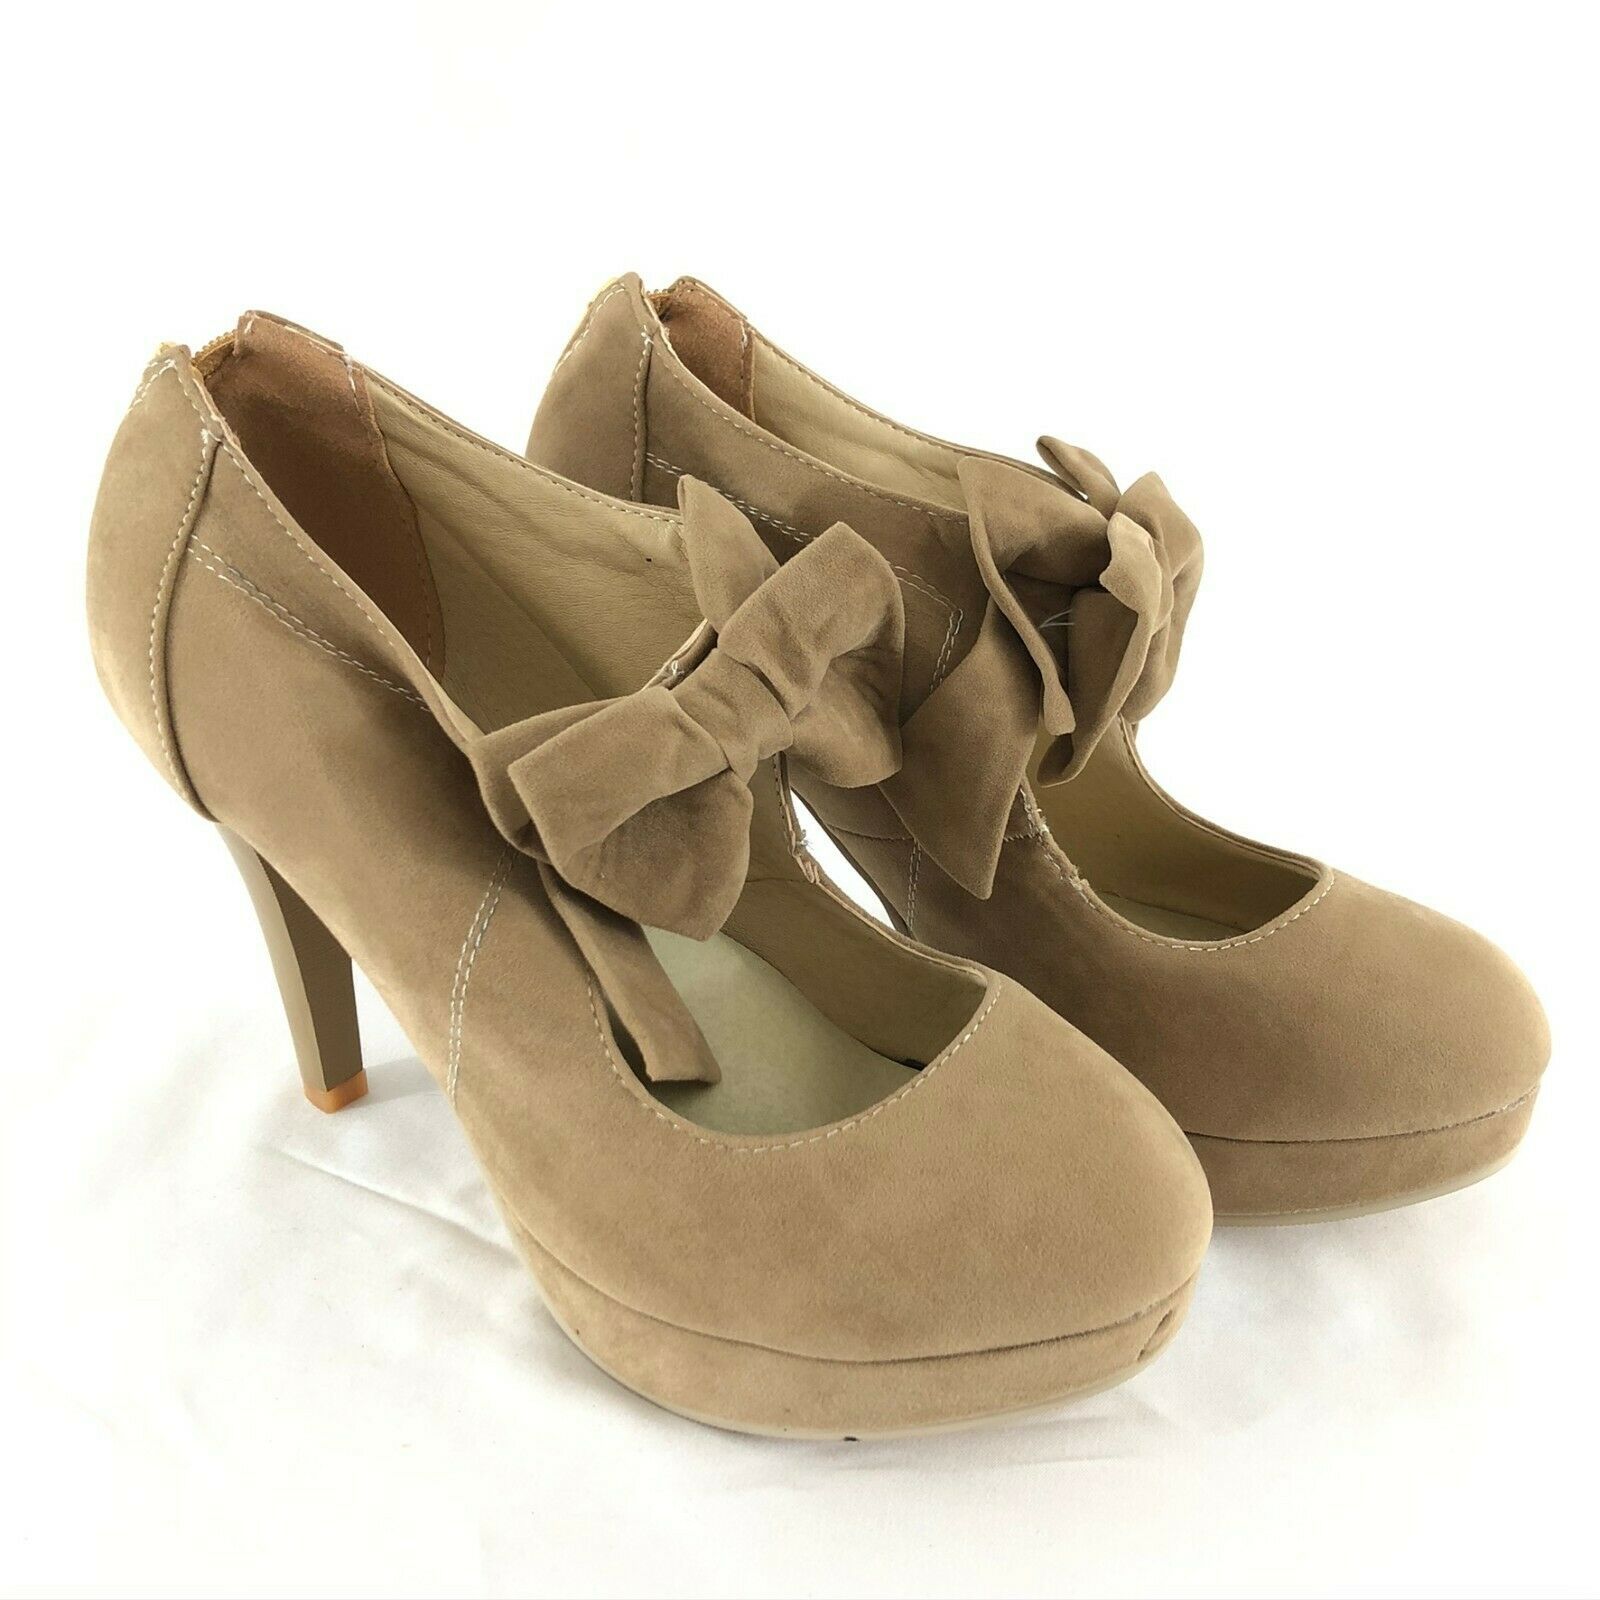 Primary image for Womens Stiletto Platform Pumps Faux Suede Bows Brown Size 39 US 9